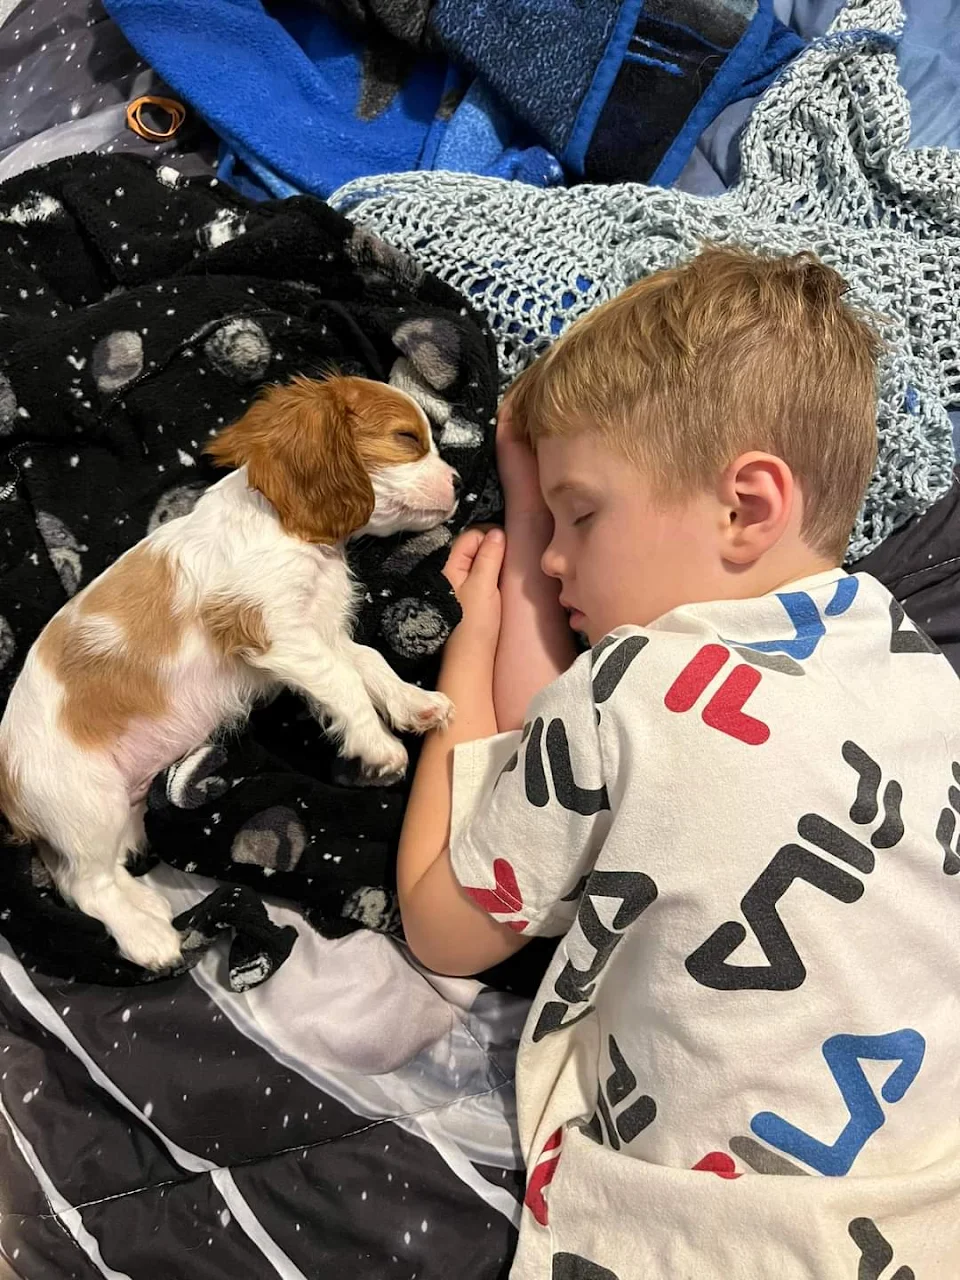 Sweetness, a boy and his new puppy